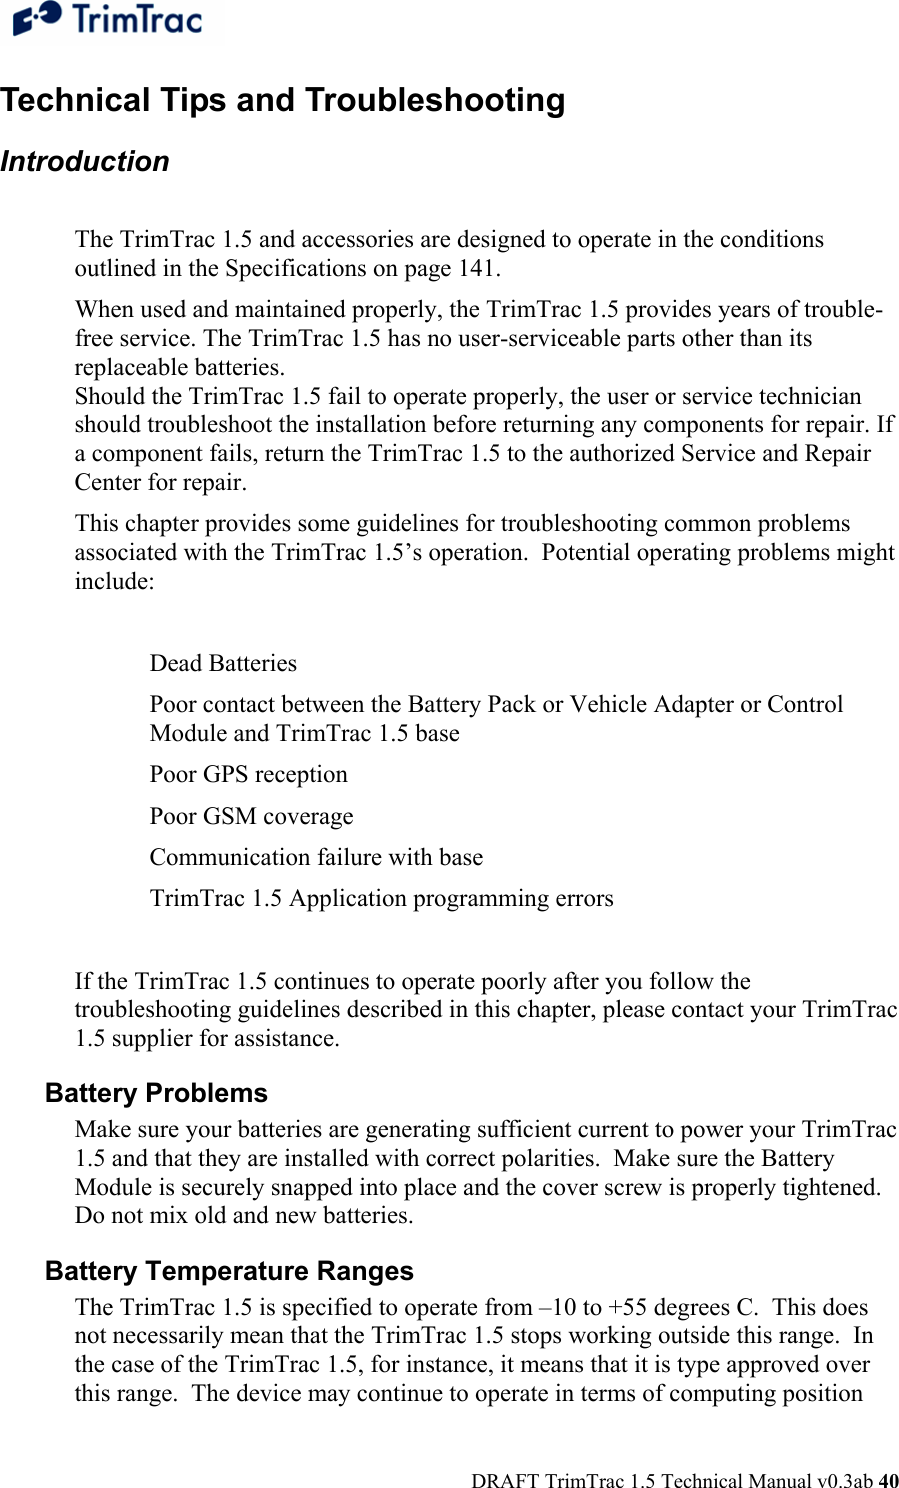  DRAFT TrimTrac 1.5 Technical Manual v0.3ab 40 Technical Tips and Troubleshooting Introduction   The TrimTrac 1.5 and accessories are designed to operate in the conditions outlined in the Specifications on page 141.  When used and maintained properly, the TrimTrac 1.5 provides years of trouble-free service. The TrimTrac 1.5 has no user-serviceable parts other than its replaceable batteries. Should the TrimTrac 1.5 fail to operate properly, the user or service technician should troubleshoot the installation before returning any components for repair. If a component fails, return the TrimTrac 1.5 to the authorized Service and Repair Center for repair.  This chapter provides some guidelines for troubleshooting common problems associated with the TrimTrac 1.5’s operation.  Potential operating problems might include:  Dead Batteries  Poor contact between the Battery Pack or Vehicle Adapter or Control Module and TrimTrac 1.5 base  Poor GPS reception  Poor GSM coverage  Communication failure with base  TrimTrac 1.5 Application programming errors   If the TrimTrac 1.5 continues to operate poorly after you follow the troubleshooting guidelines described in this chapter, please contact your TrimTrac 1.5 supplier for assistance. Battery Problems  Make sure your batteries are generating sufficient current to power your TrimTrac 1.5 and that they are installed with correct polarities.  Make sure the Battery Module is securely snapped into place and the cover screw is properly tightened.  Do not mix old and new batteries. Battery Temperature Ranges  The TrimTrac 1.5 is specified to operate from –10 to +55 degrees C.  This does not necessarily mean that the TrimTrac 1.5 stops working outside this range.  In the case of the TrimTrac 1.5, for instance, it means that it is type approved over this range.  The device may continue to operate in terms of computing position 